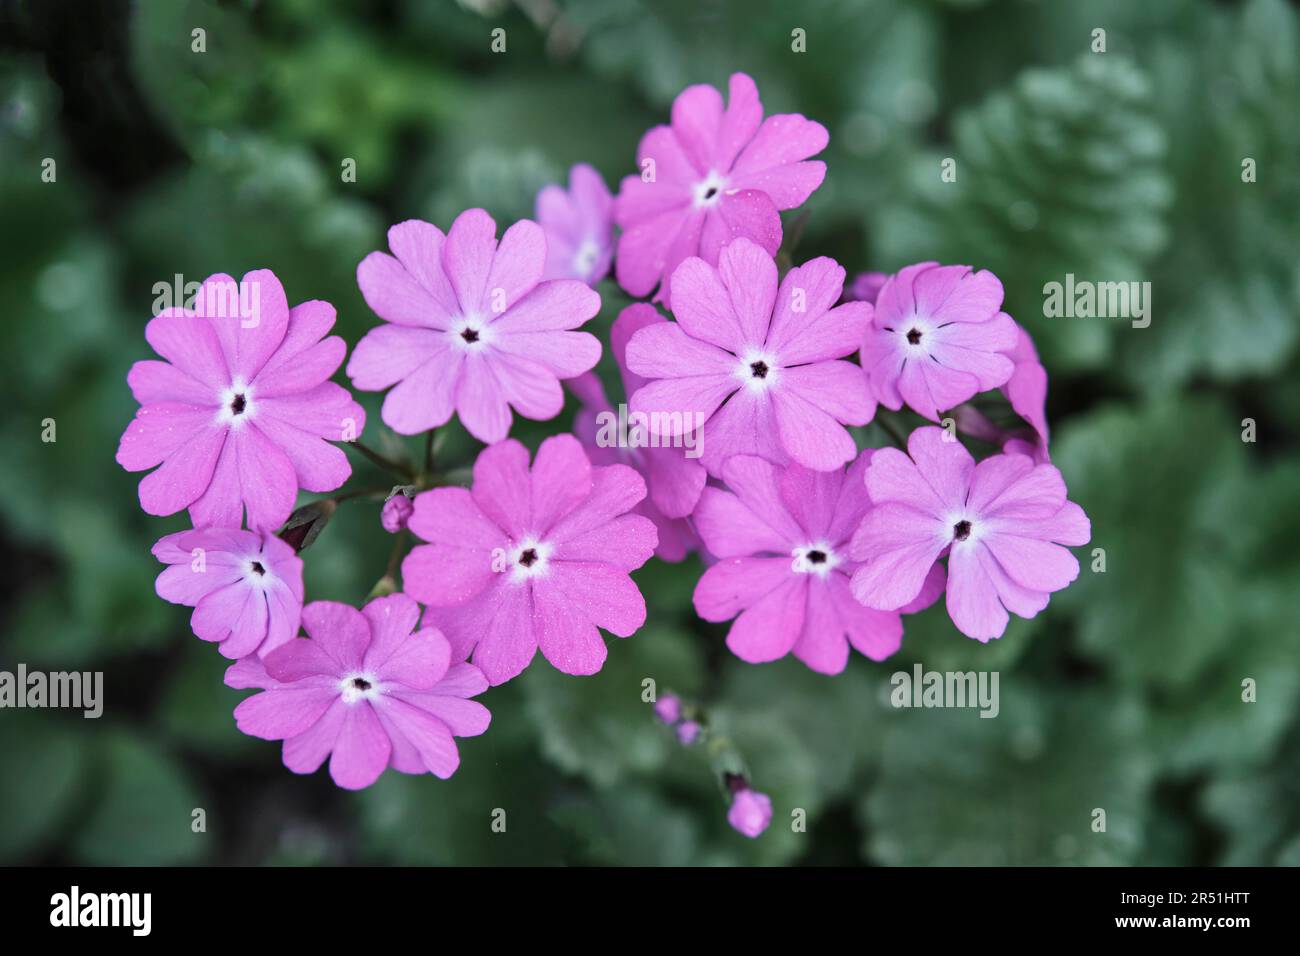 Summer natural floral background. Blooming bright purple flowers of Primula sieboldii, Japanese primrose, on green blurred background. Perennial herba Stock Photo